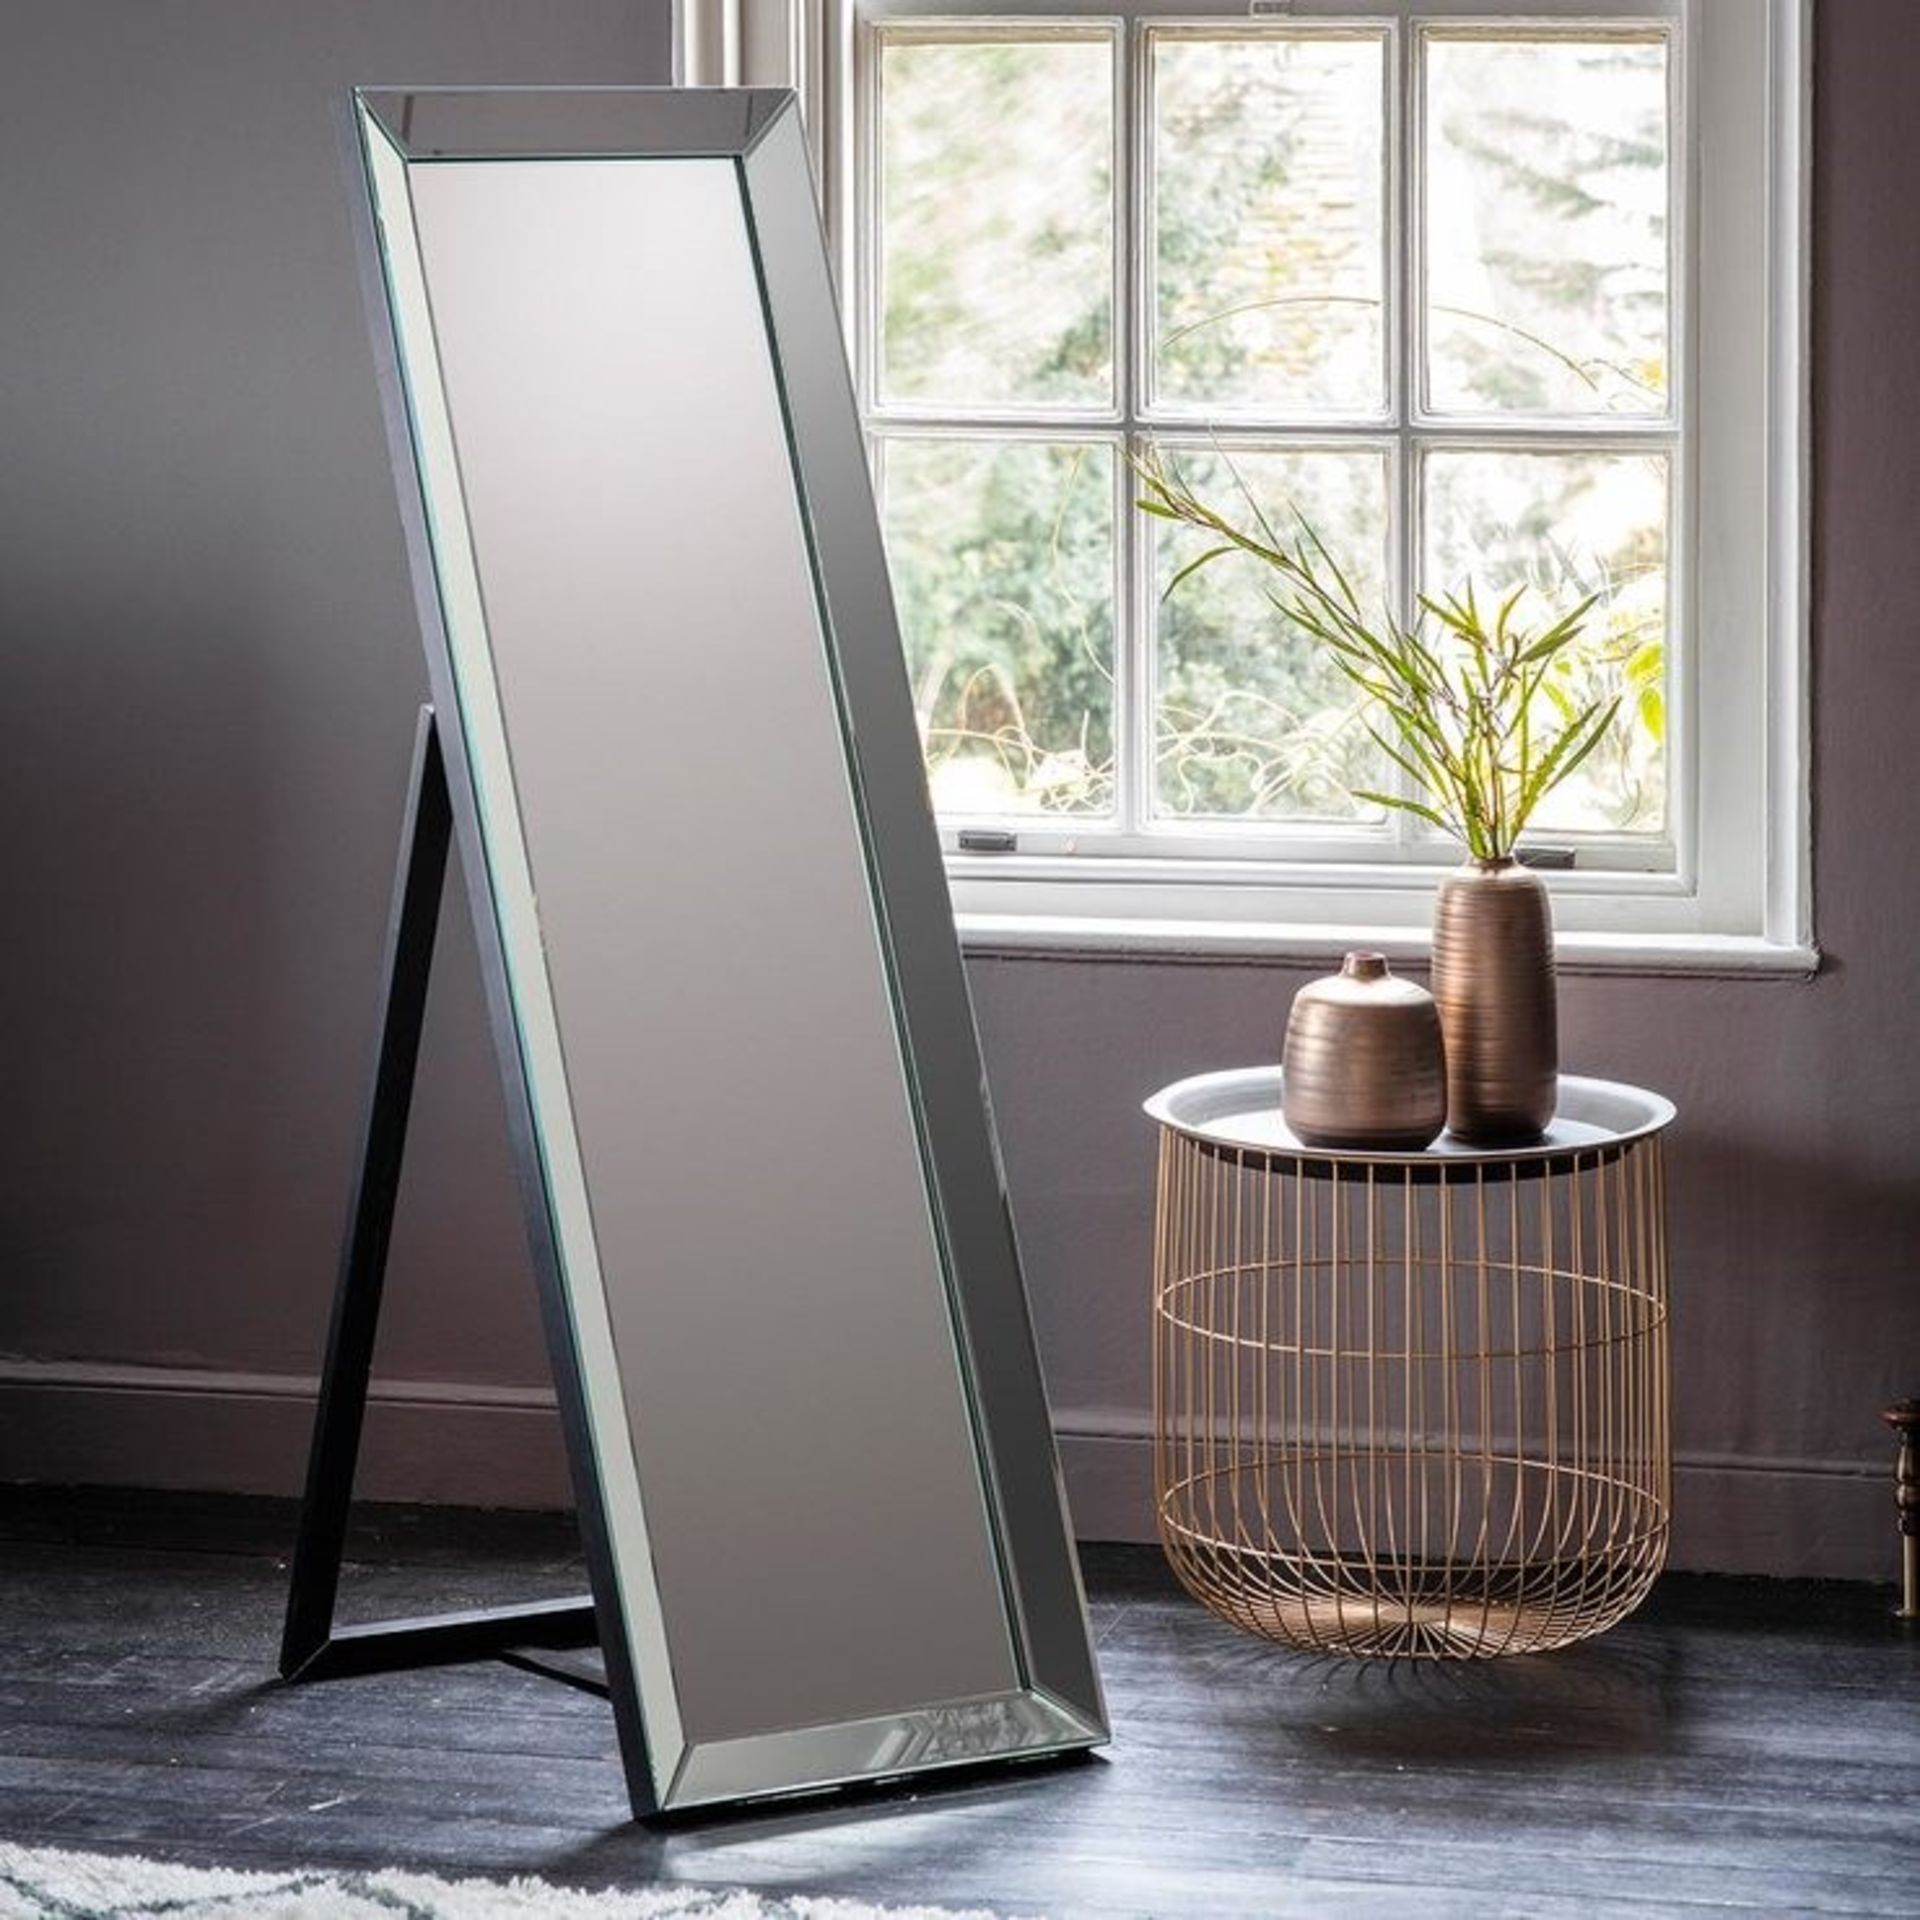 Luna Cheval Euro Grey Versatile angled all bevelled mirror framed cheval at a scale to suit any